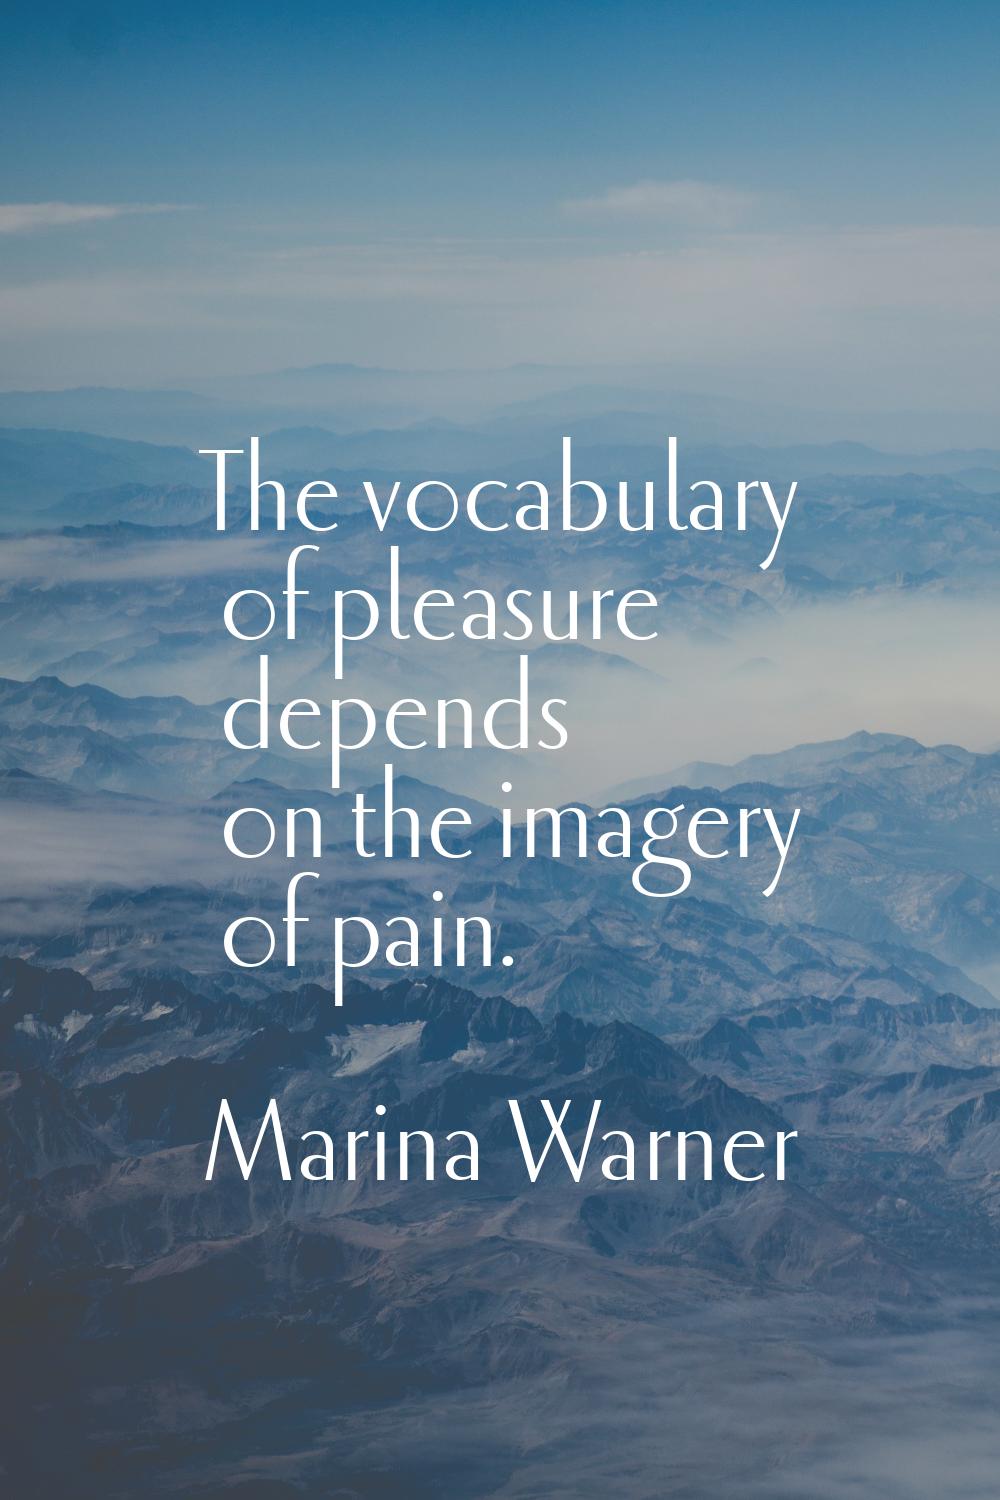 The vocabulary of pleasure depends on the imagery of pain.